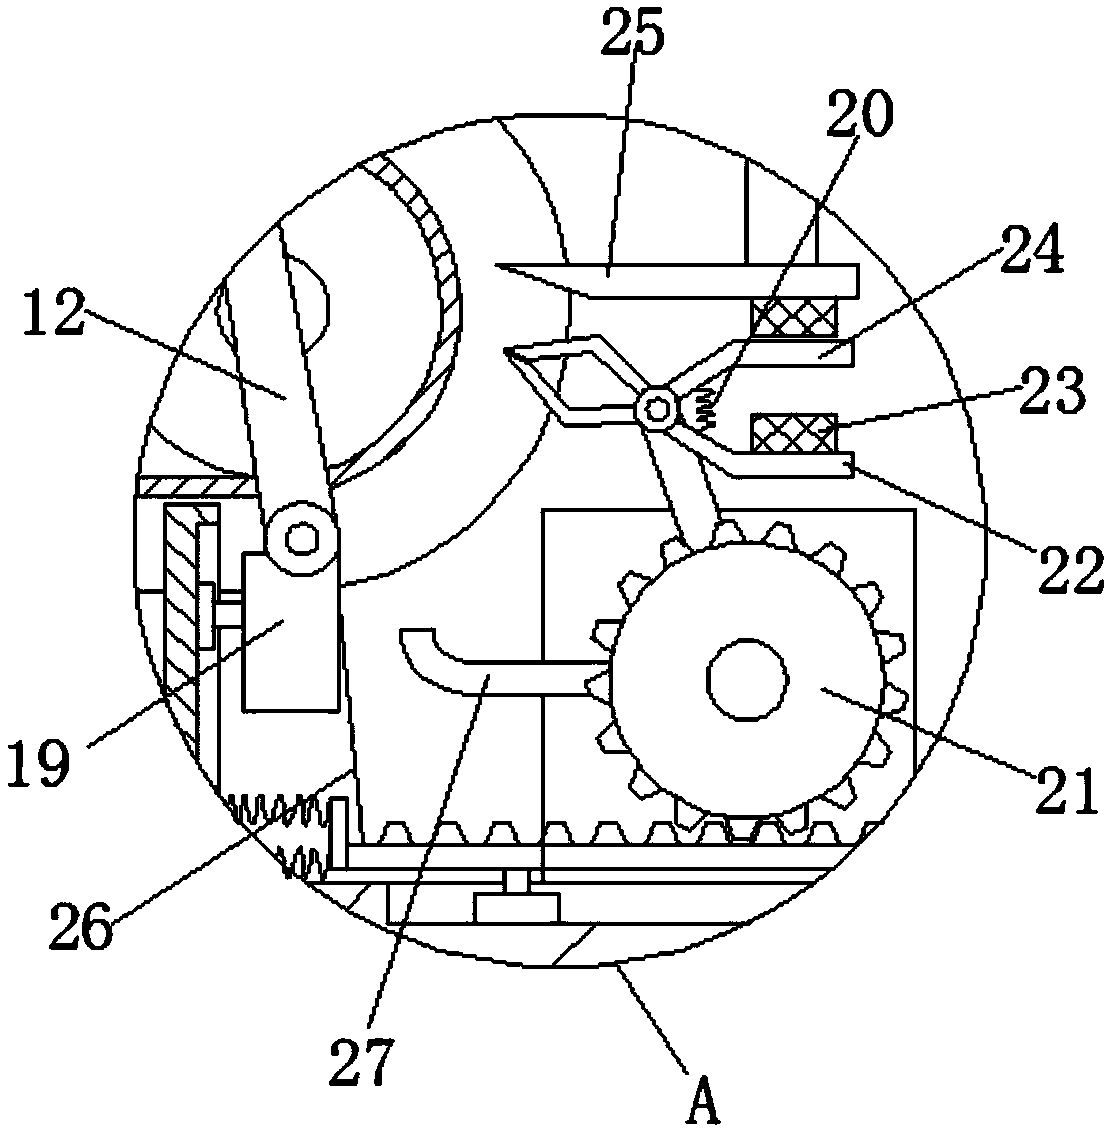 Seedling separation device of agricultural machinery